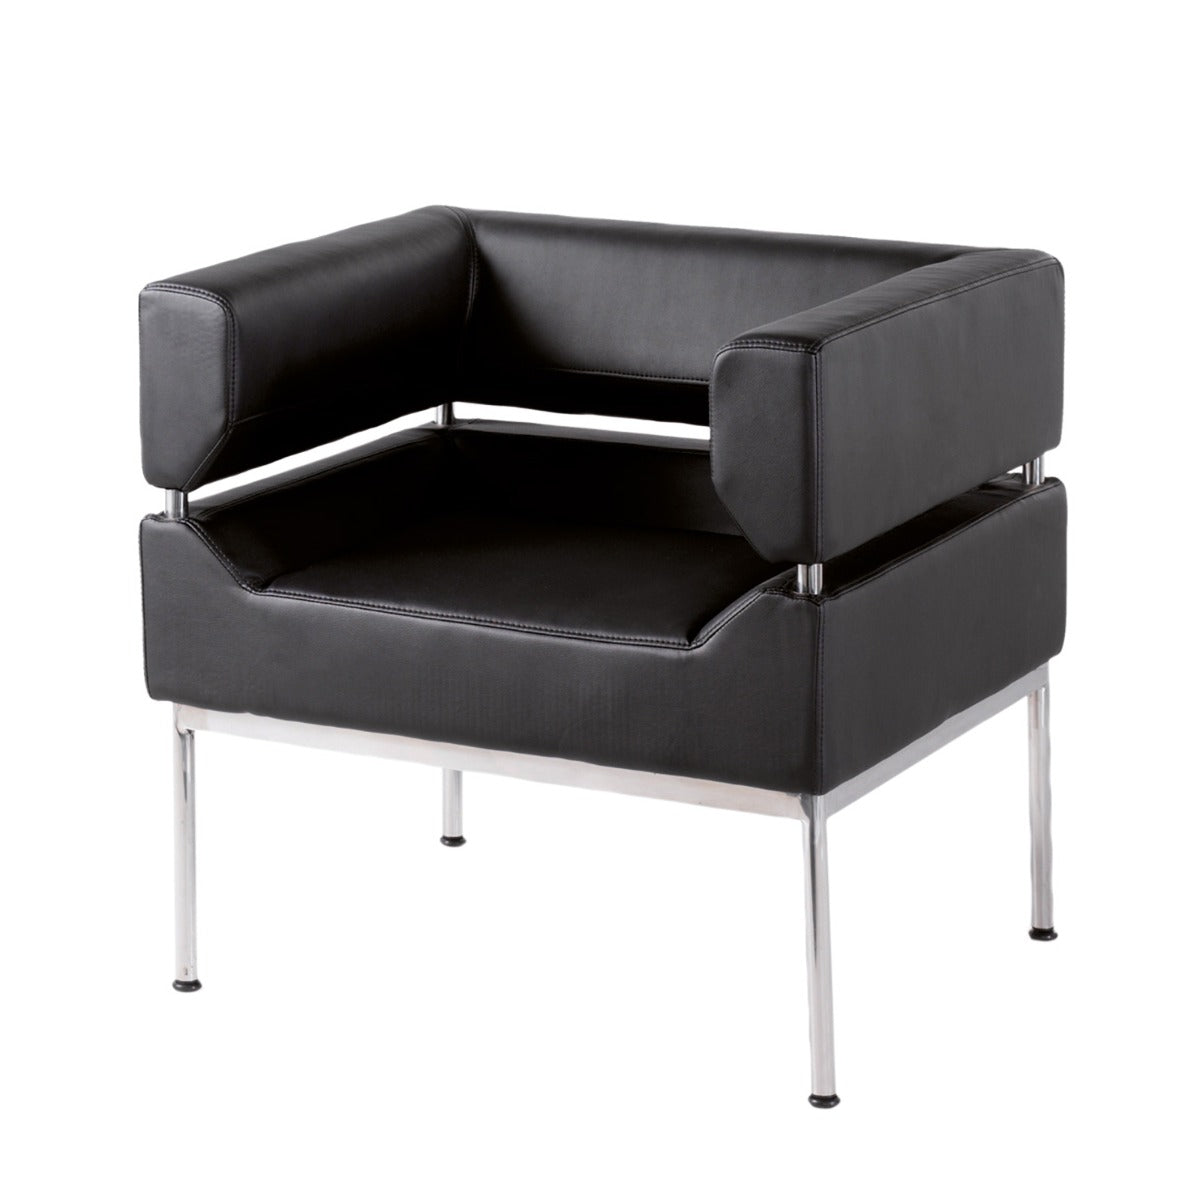 Benotto Faux Leather Sofa - 1, 2, 3 Seater Available